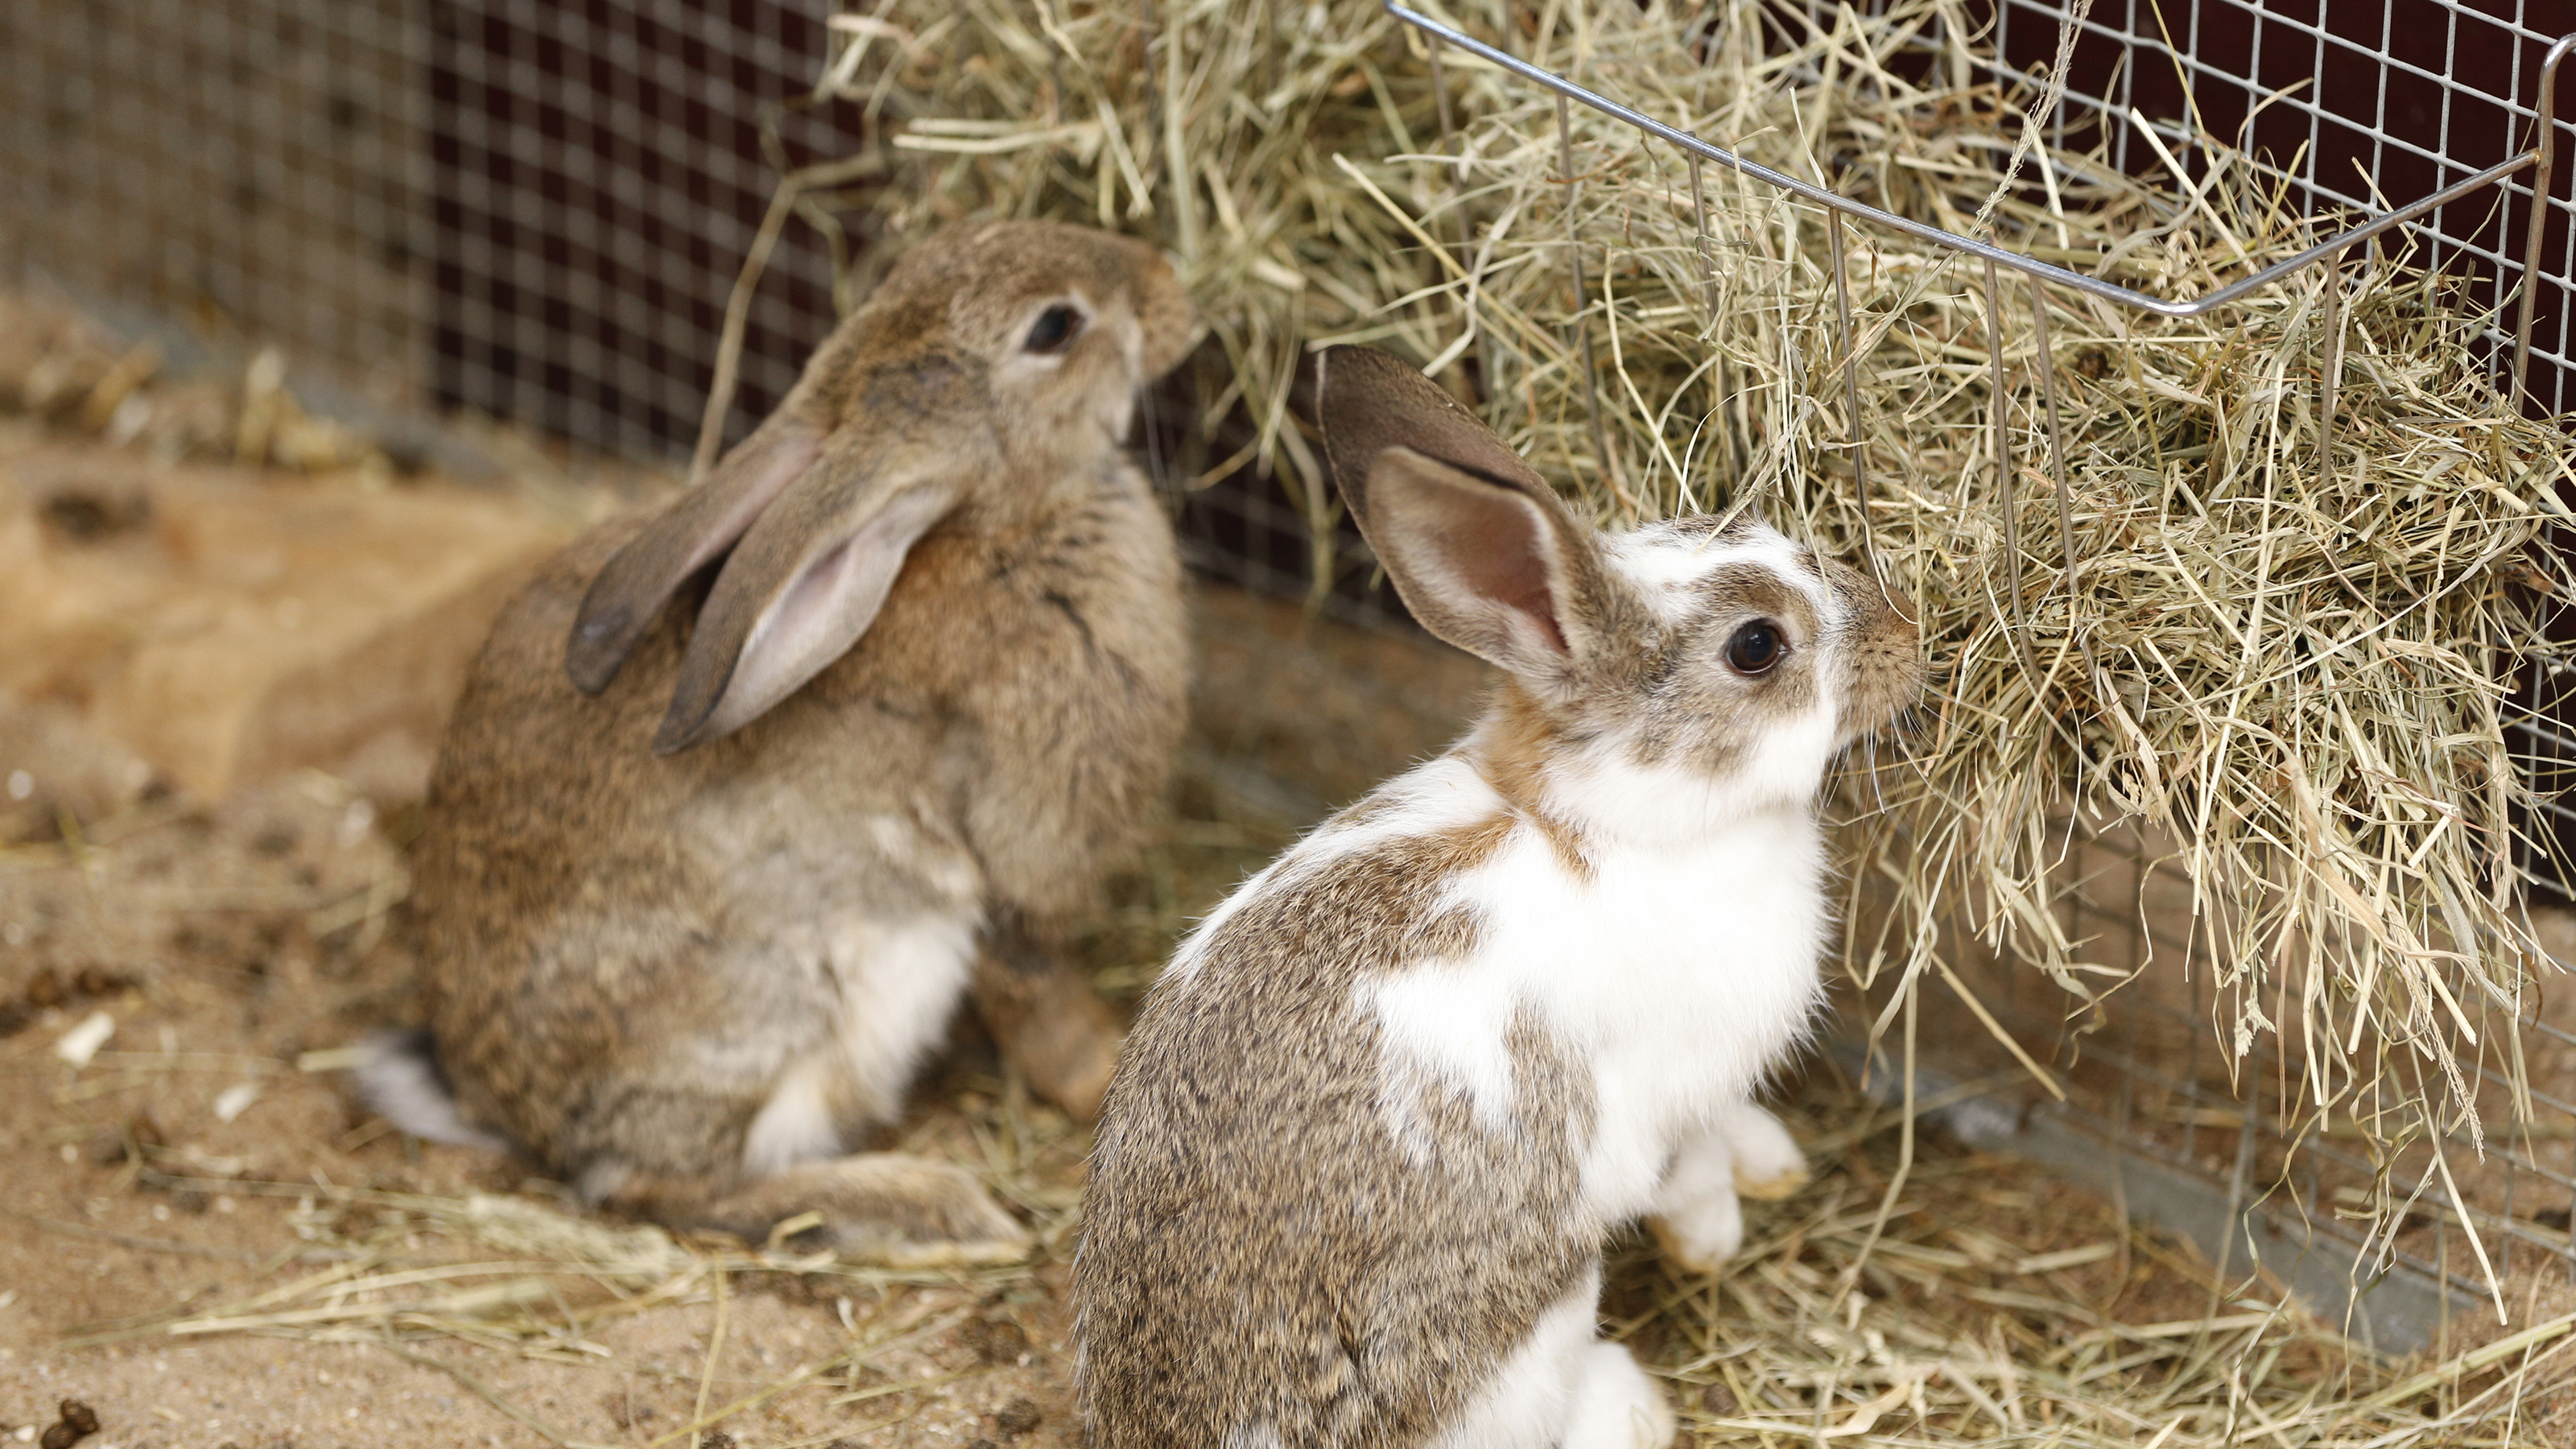 can rabbits spread disease to dogs